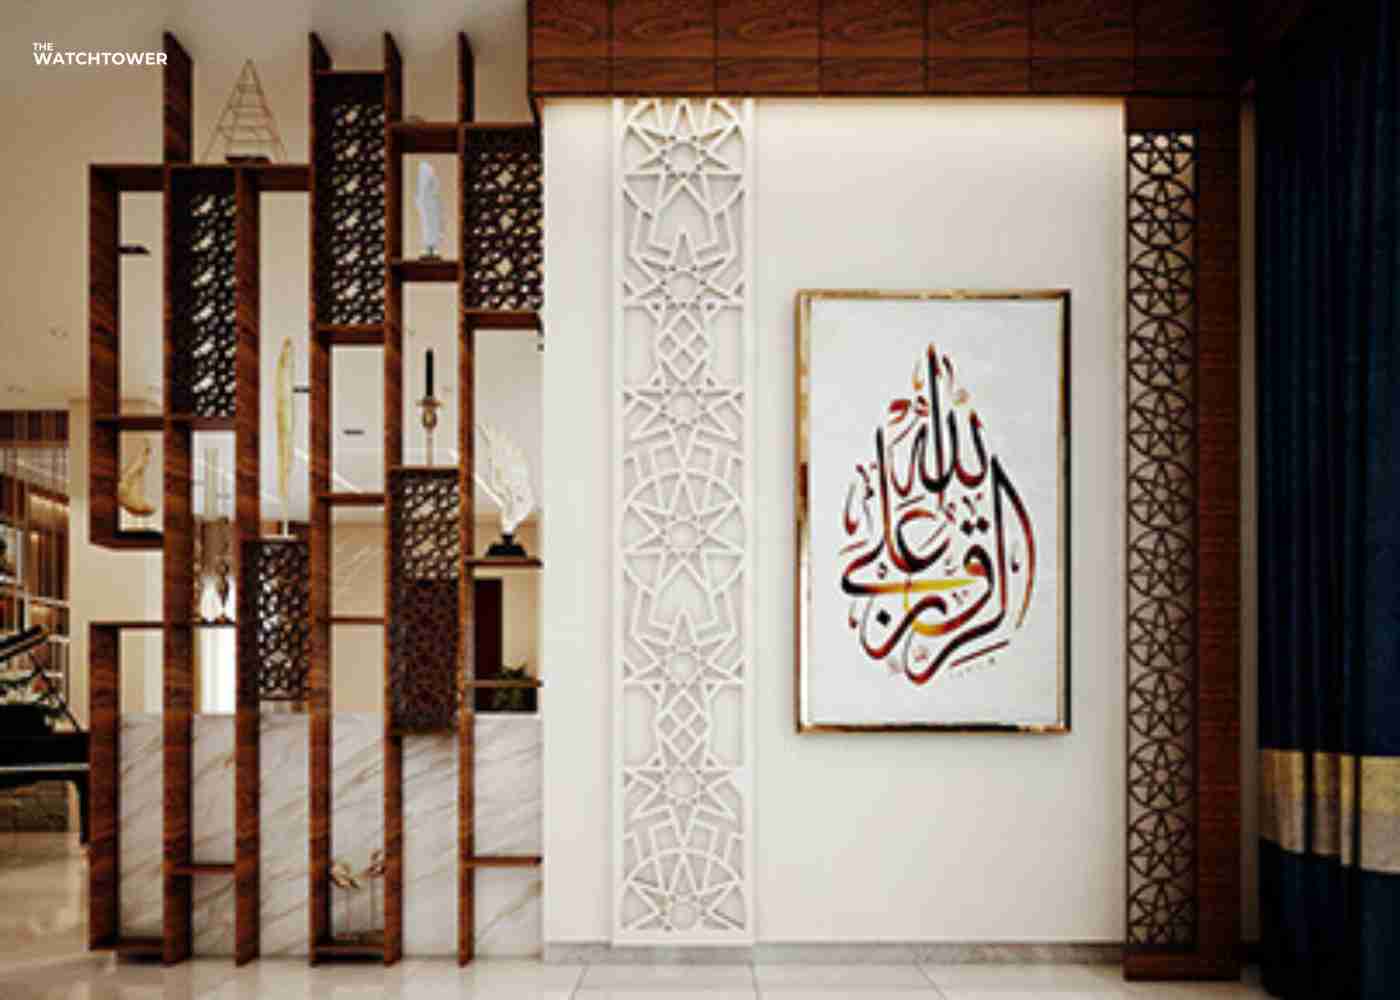 Level Up Your Commercial or Residential Space with Stunning Accent Wall Designs from Dubai